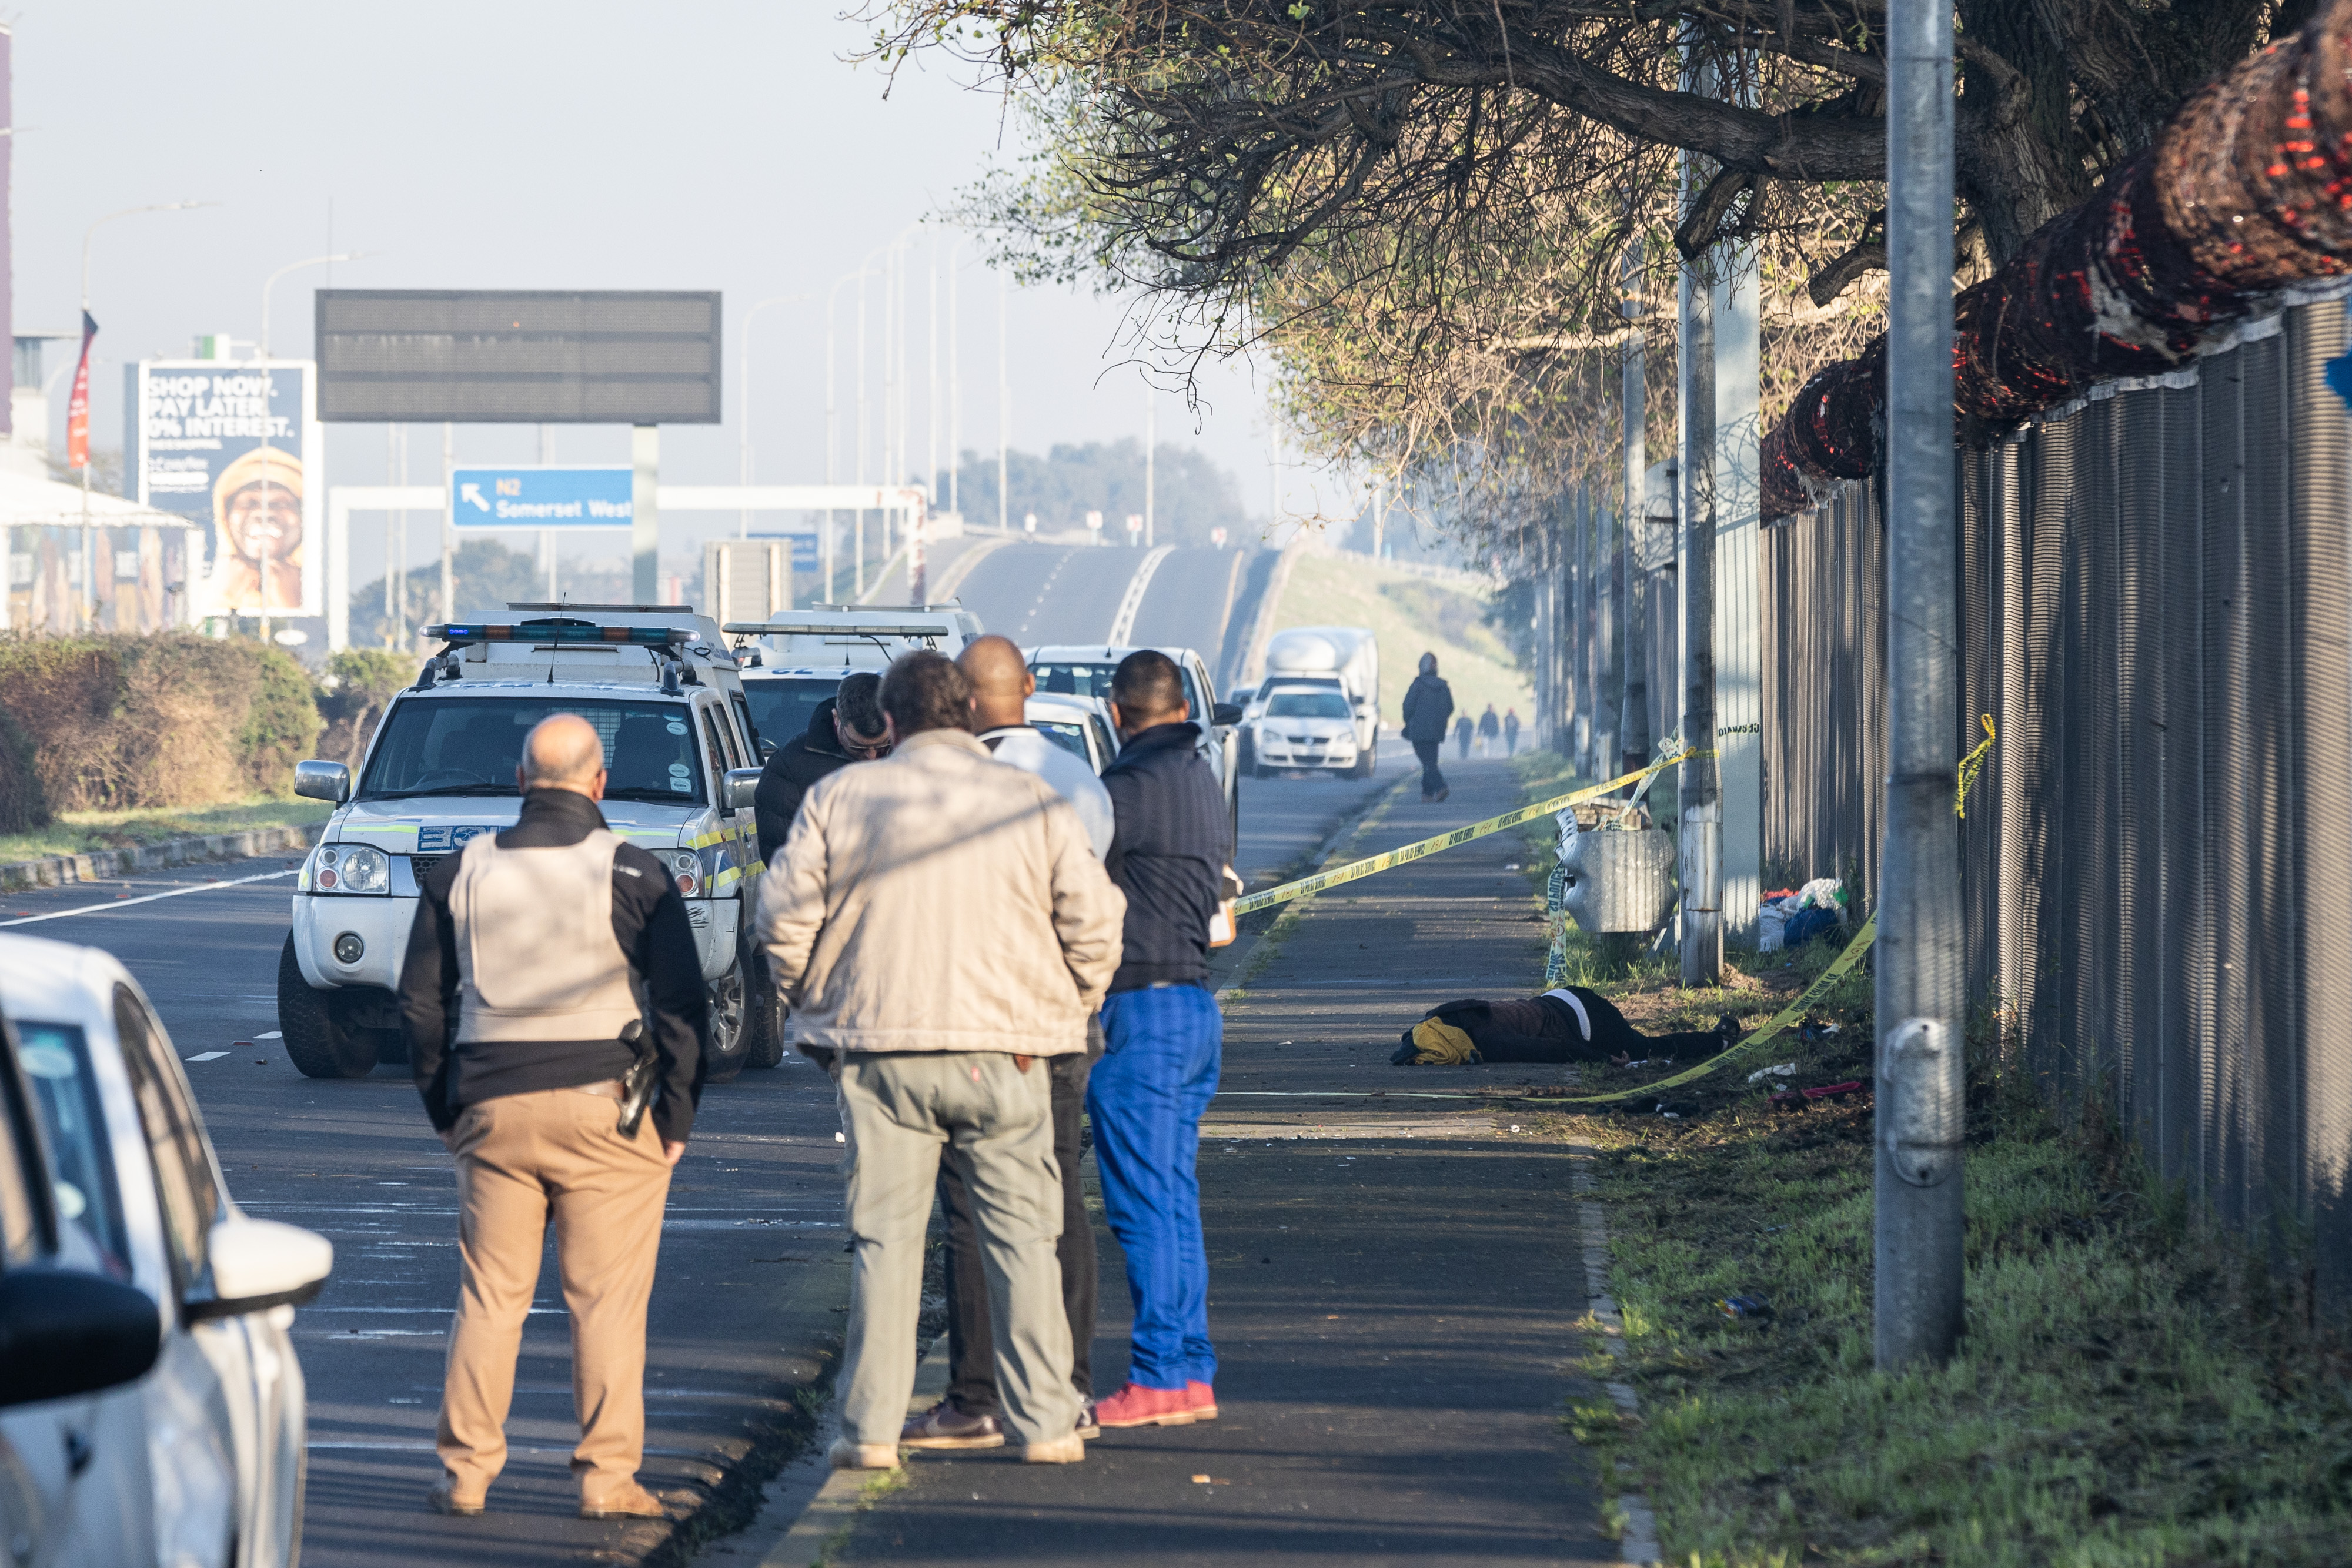 Taxi strike, dead person lies on Airport Approach road